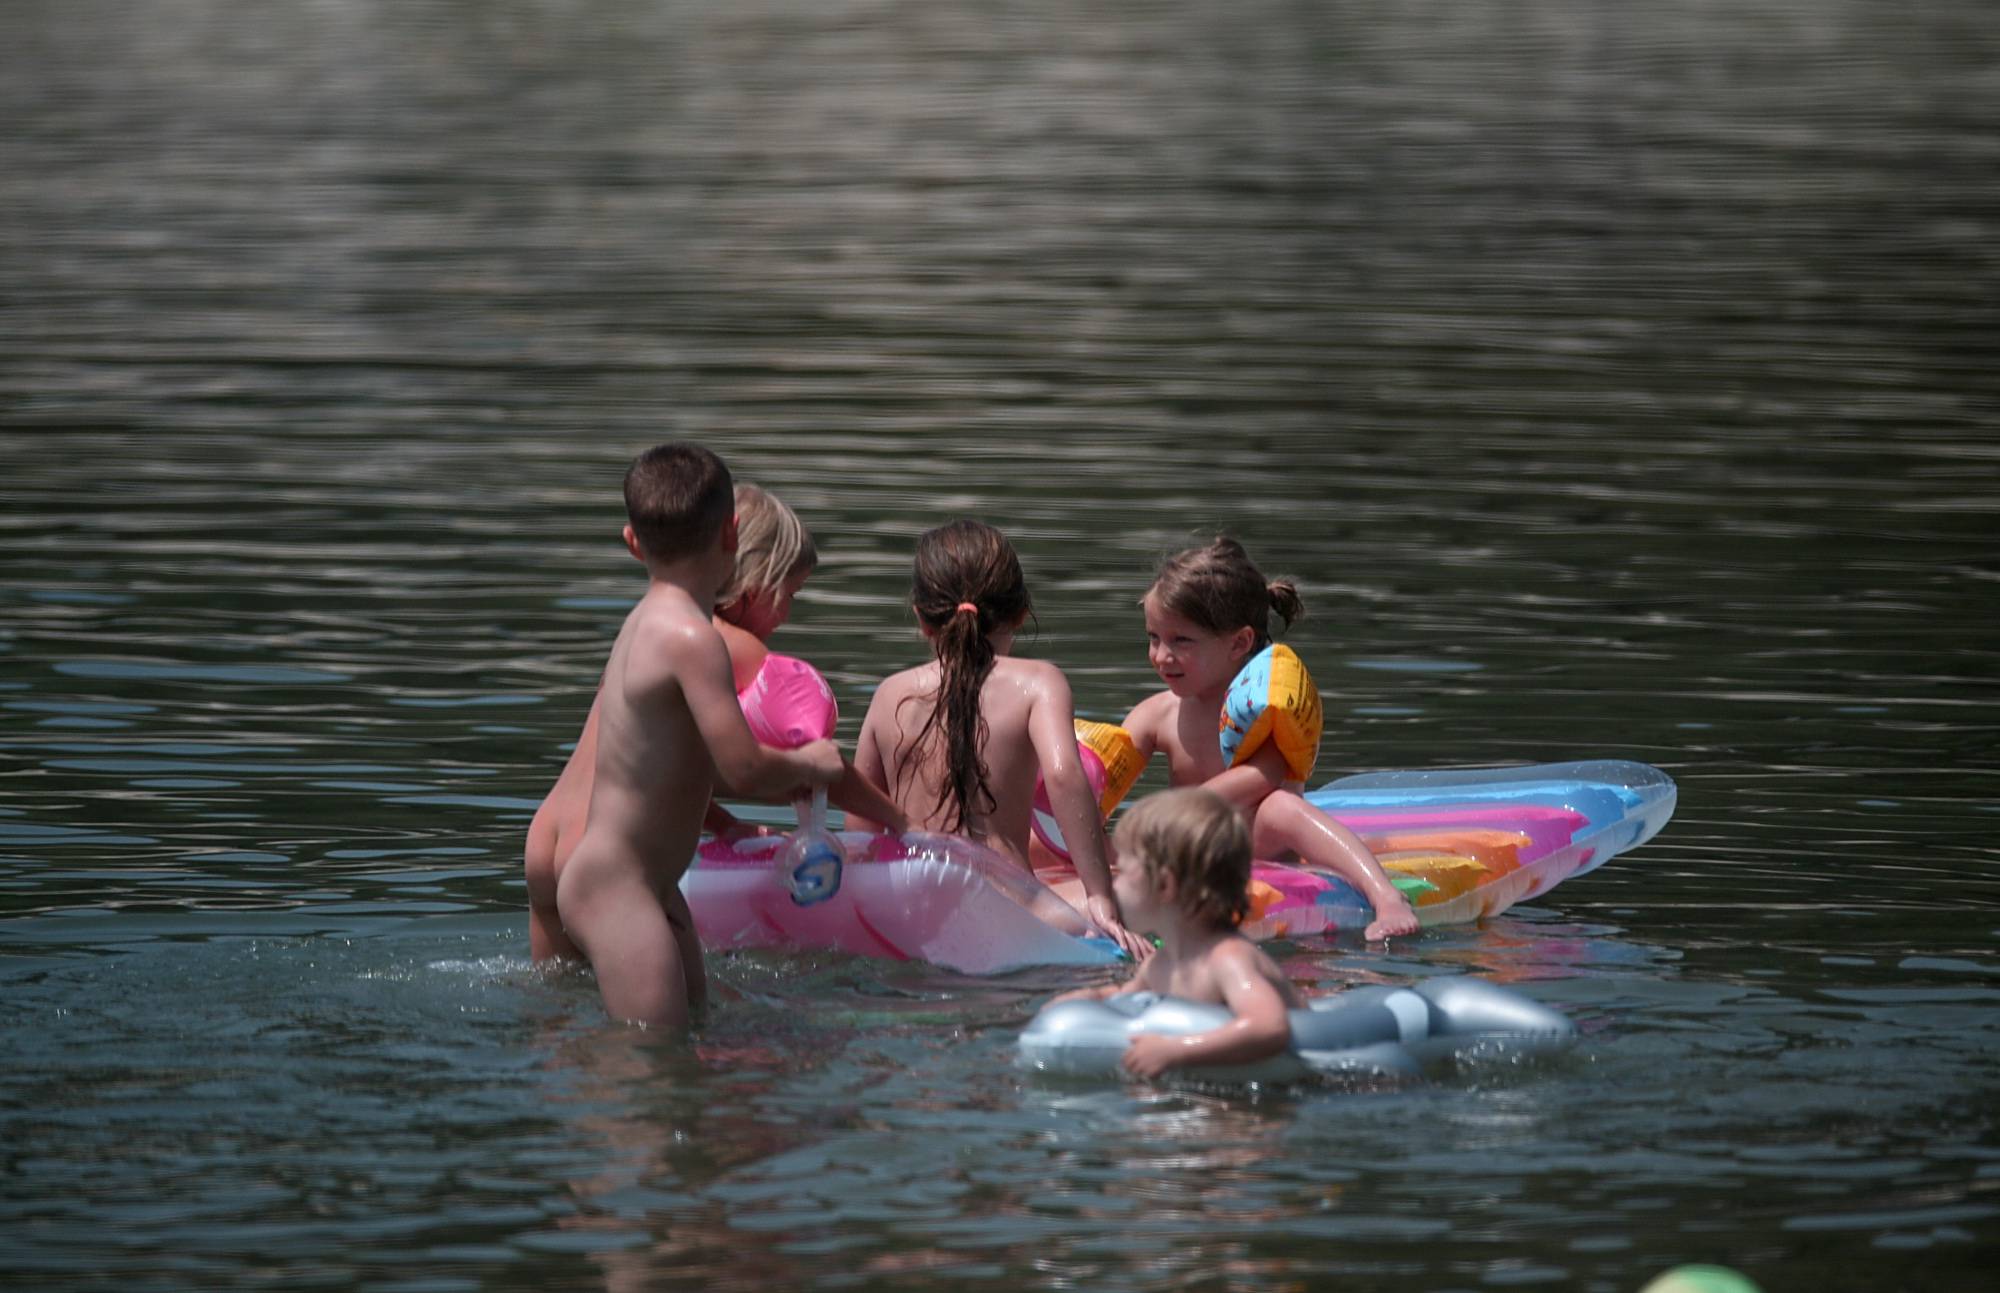 Nudist Pictures Relax Aboard A Floaty Raft - 2